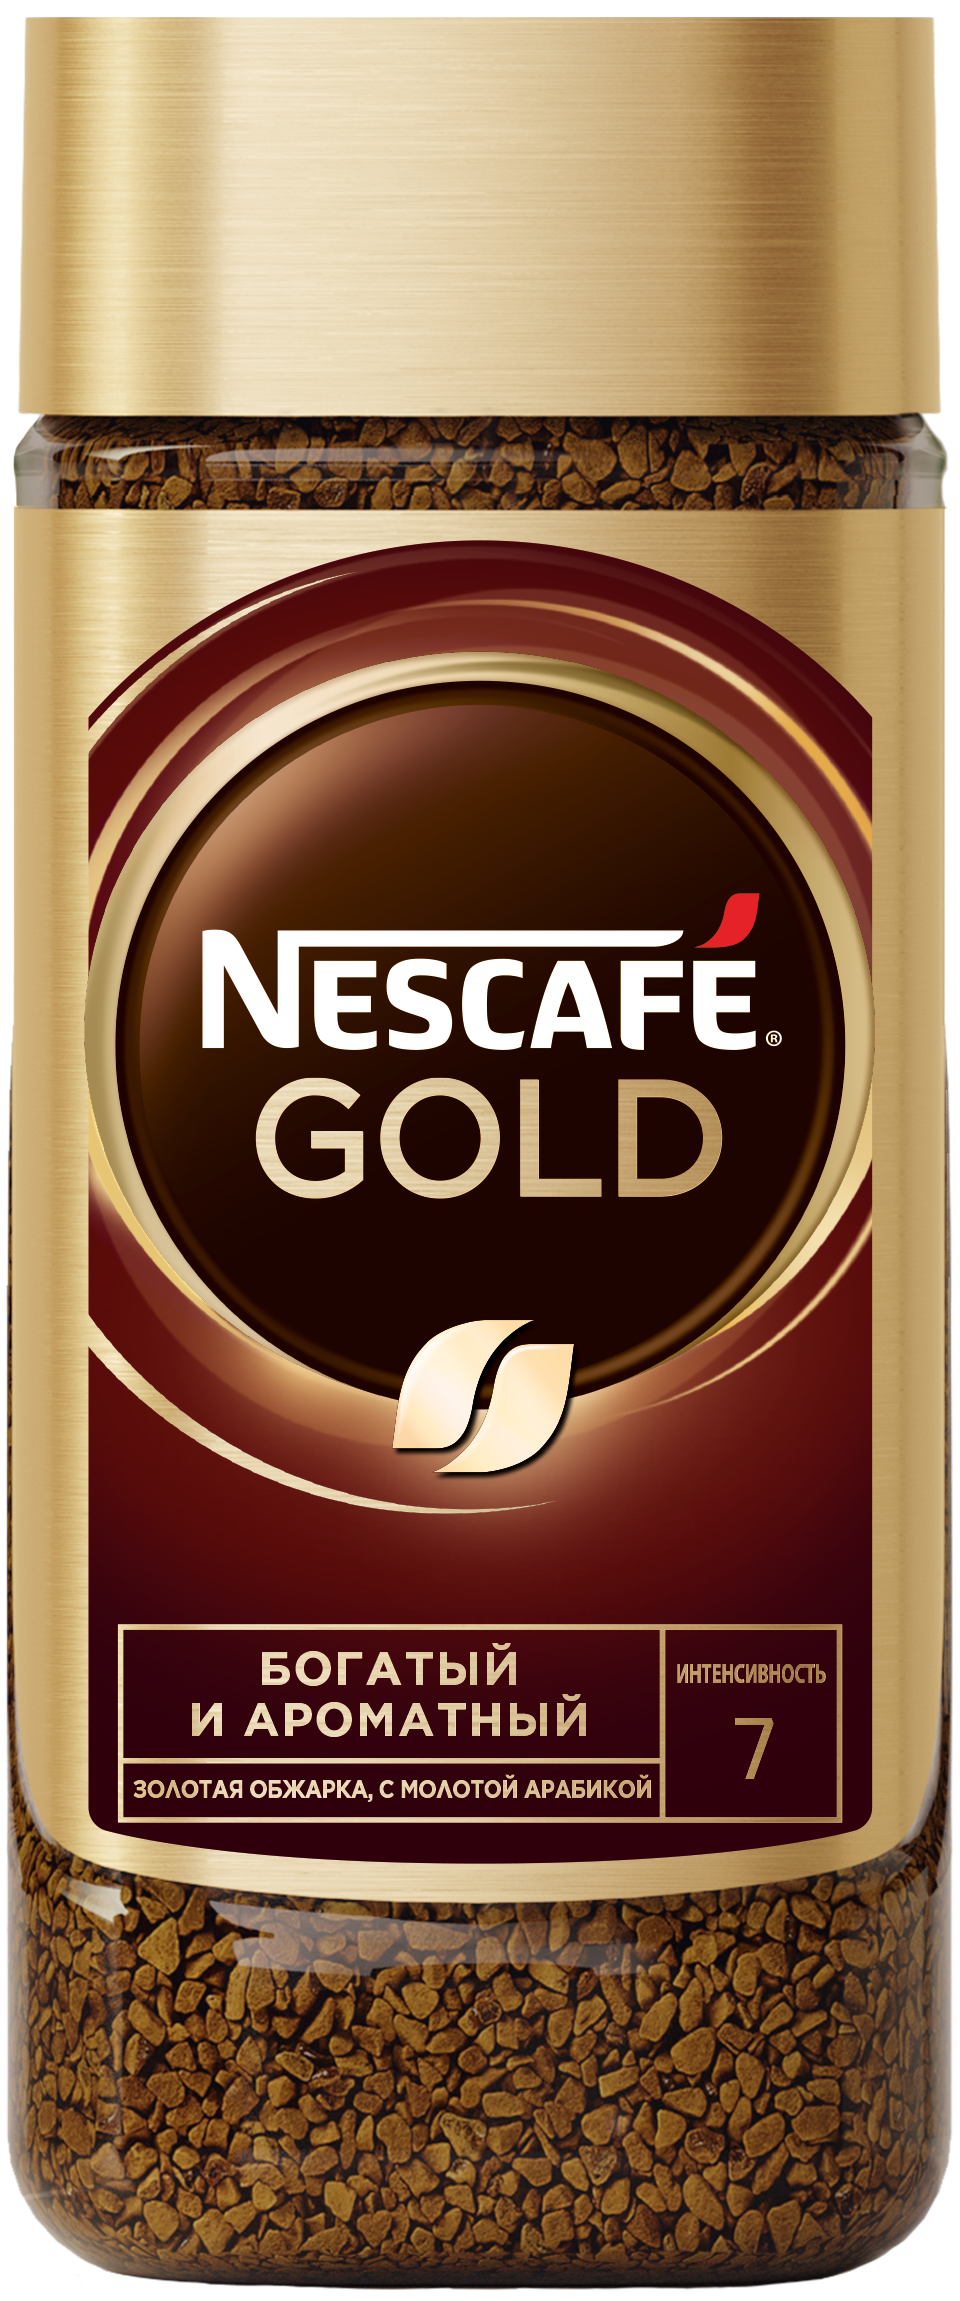 Nescafe Gold front